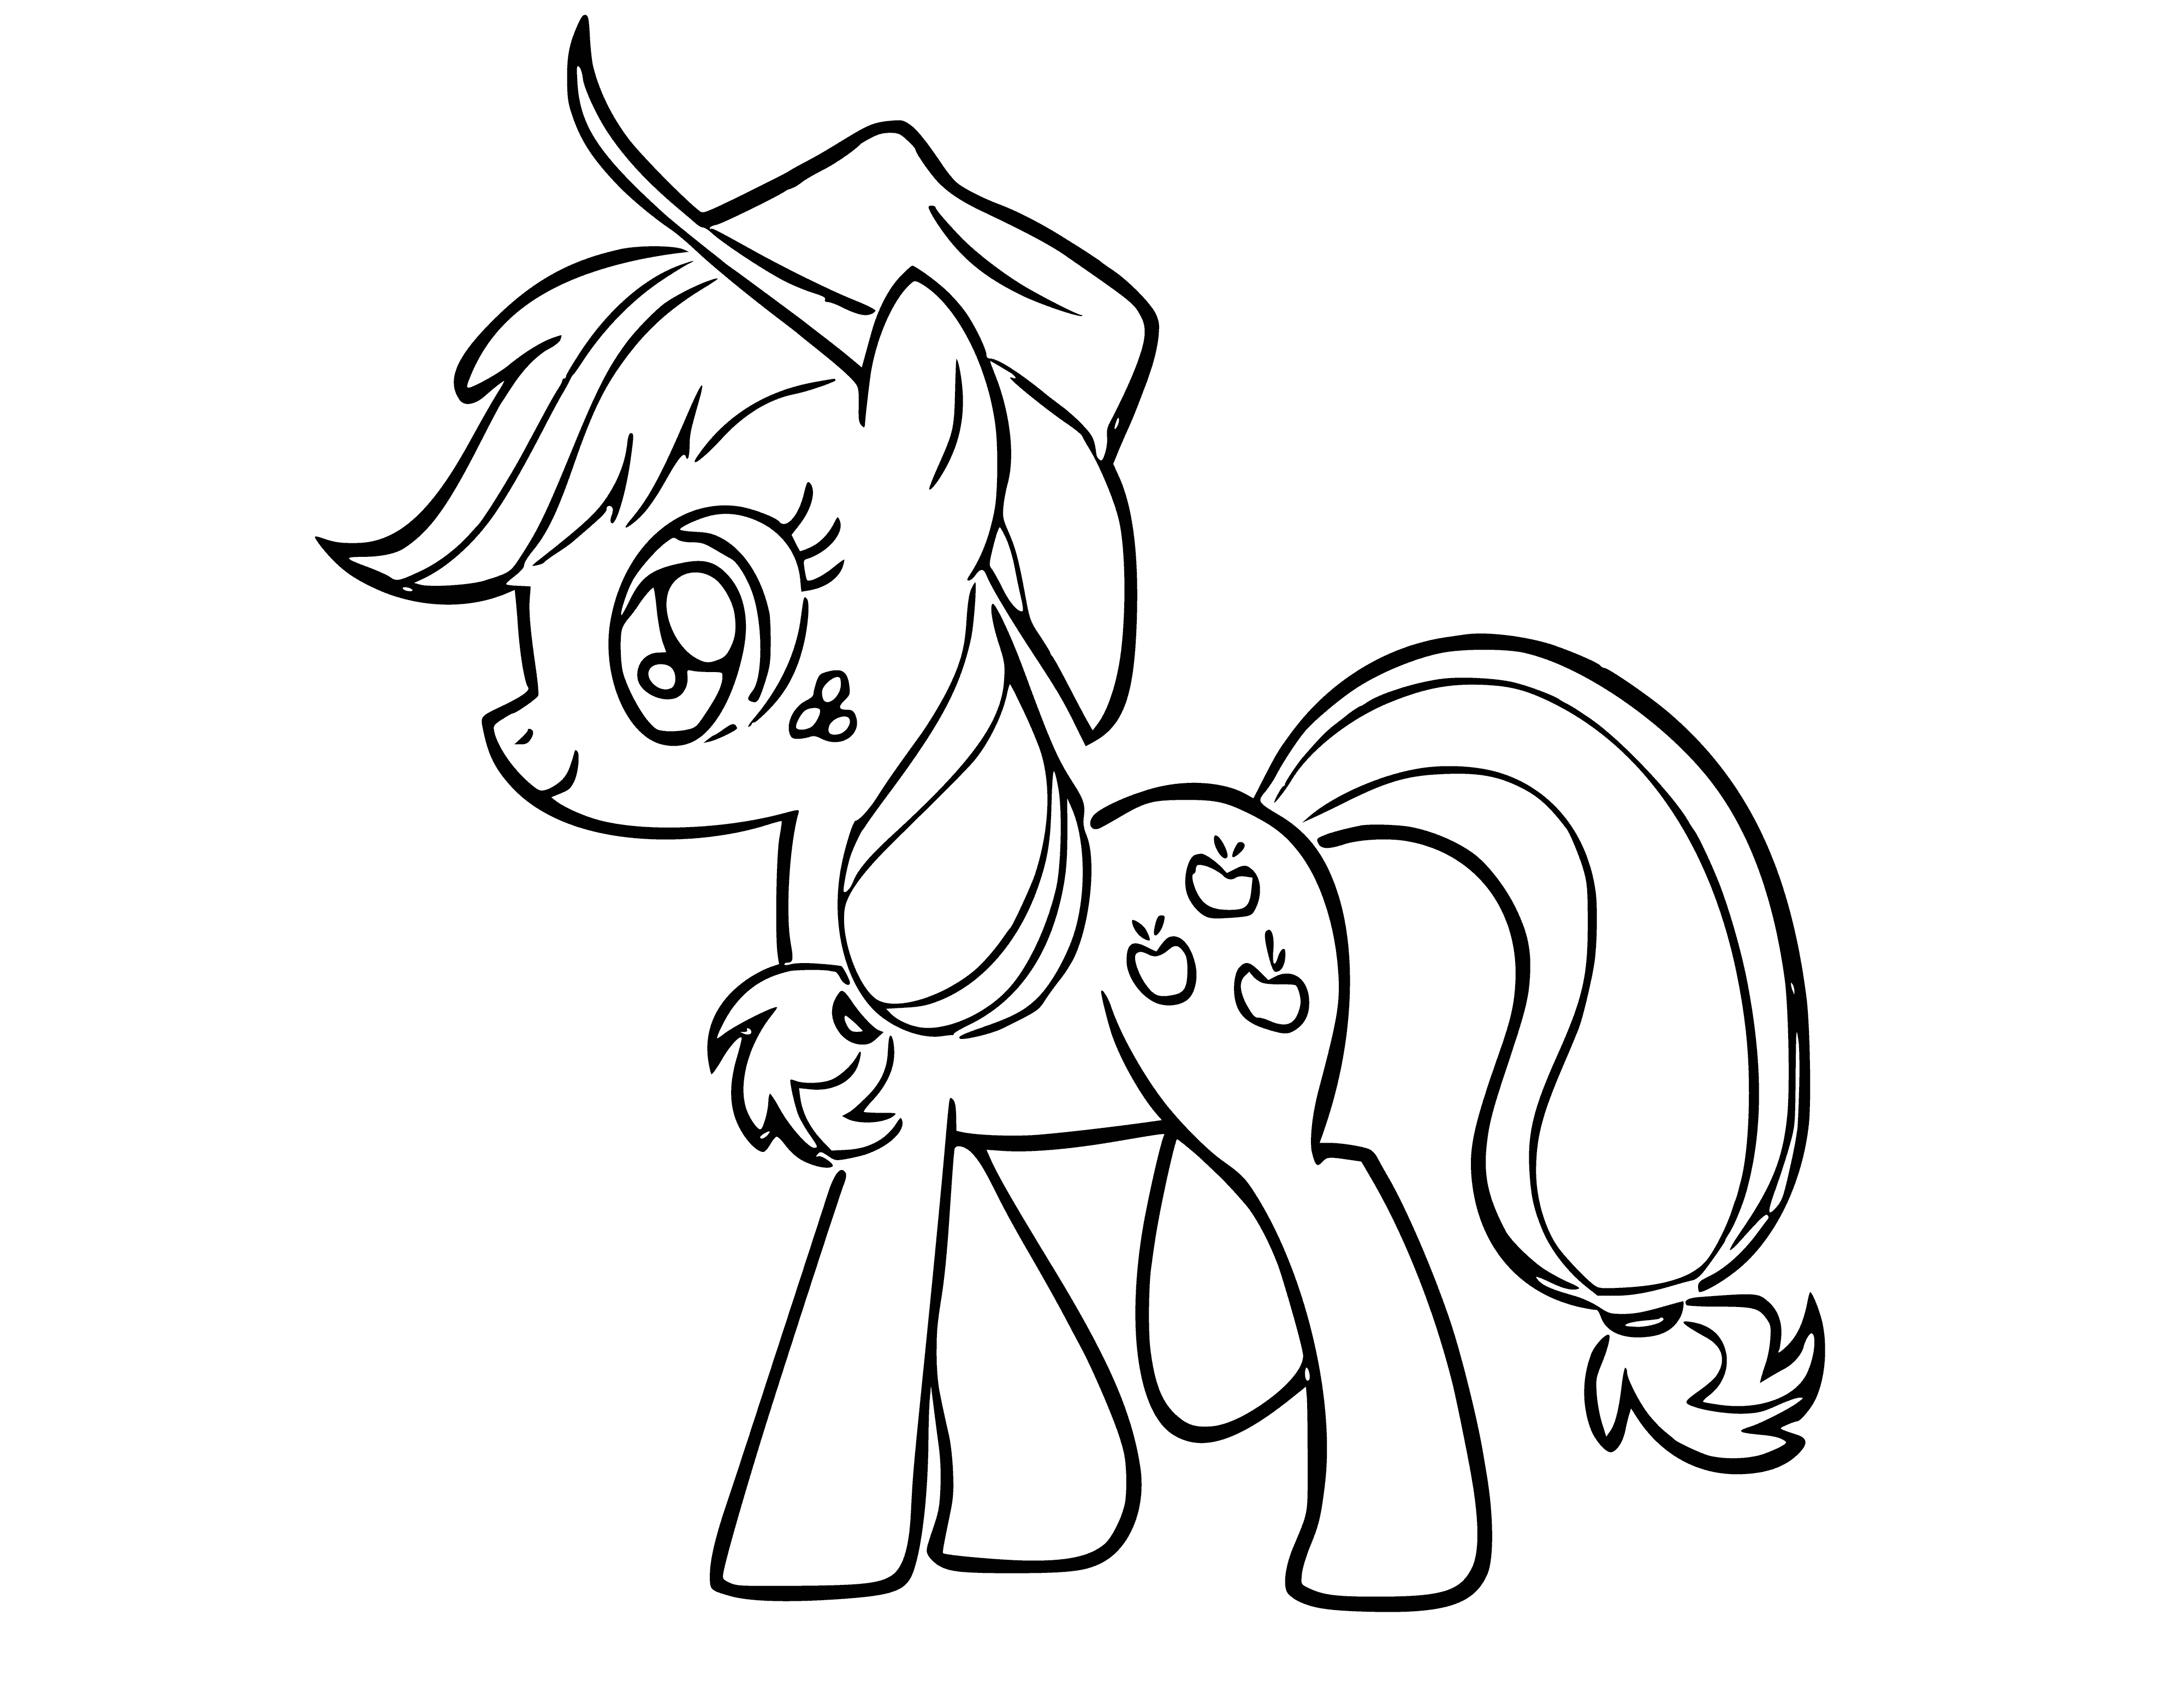 Applejack is a clever horse with a yellow coat, brown mane & tail, a cowboy hat, neckerchief and saddle. Her cutie mark is 3 apples.